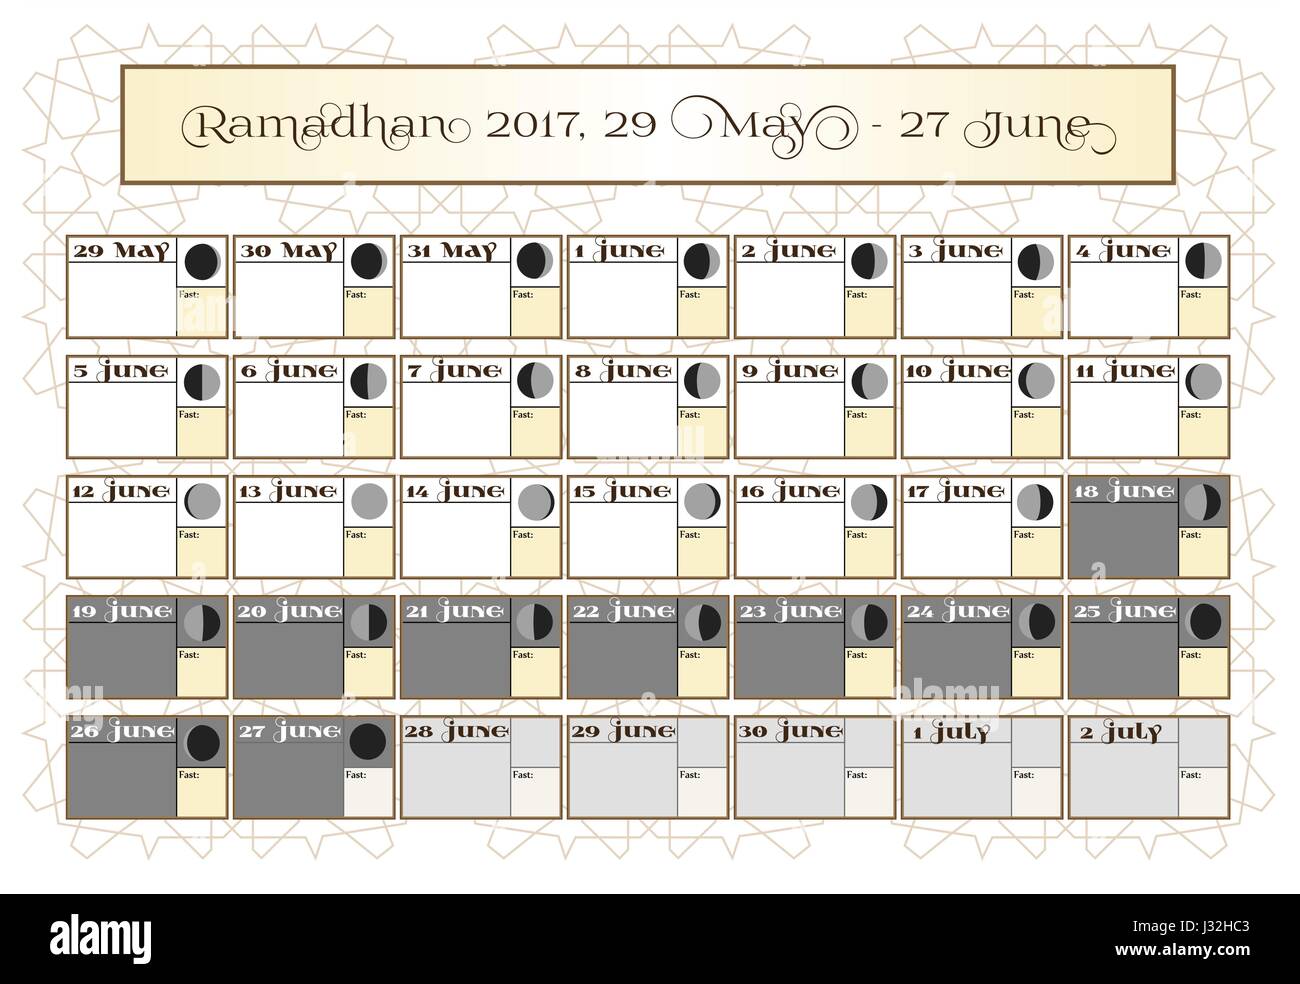 Ramadan calendar 2017, 29th May. Check date choice. Includes: fasting tick calendar, moon cycle - phases, 30 days of Ramadan on white background with Islamic pattern. Vector illustration. Stock Vector